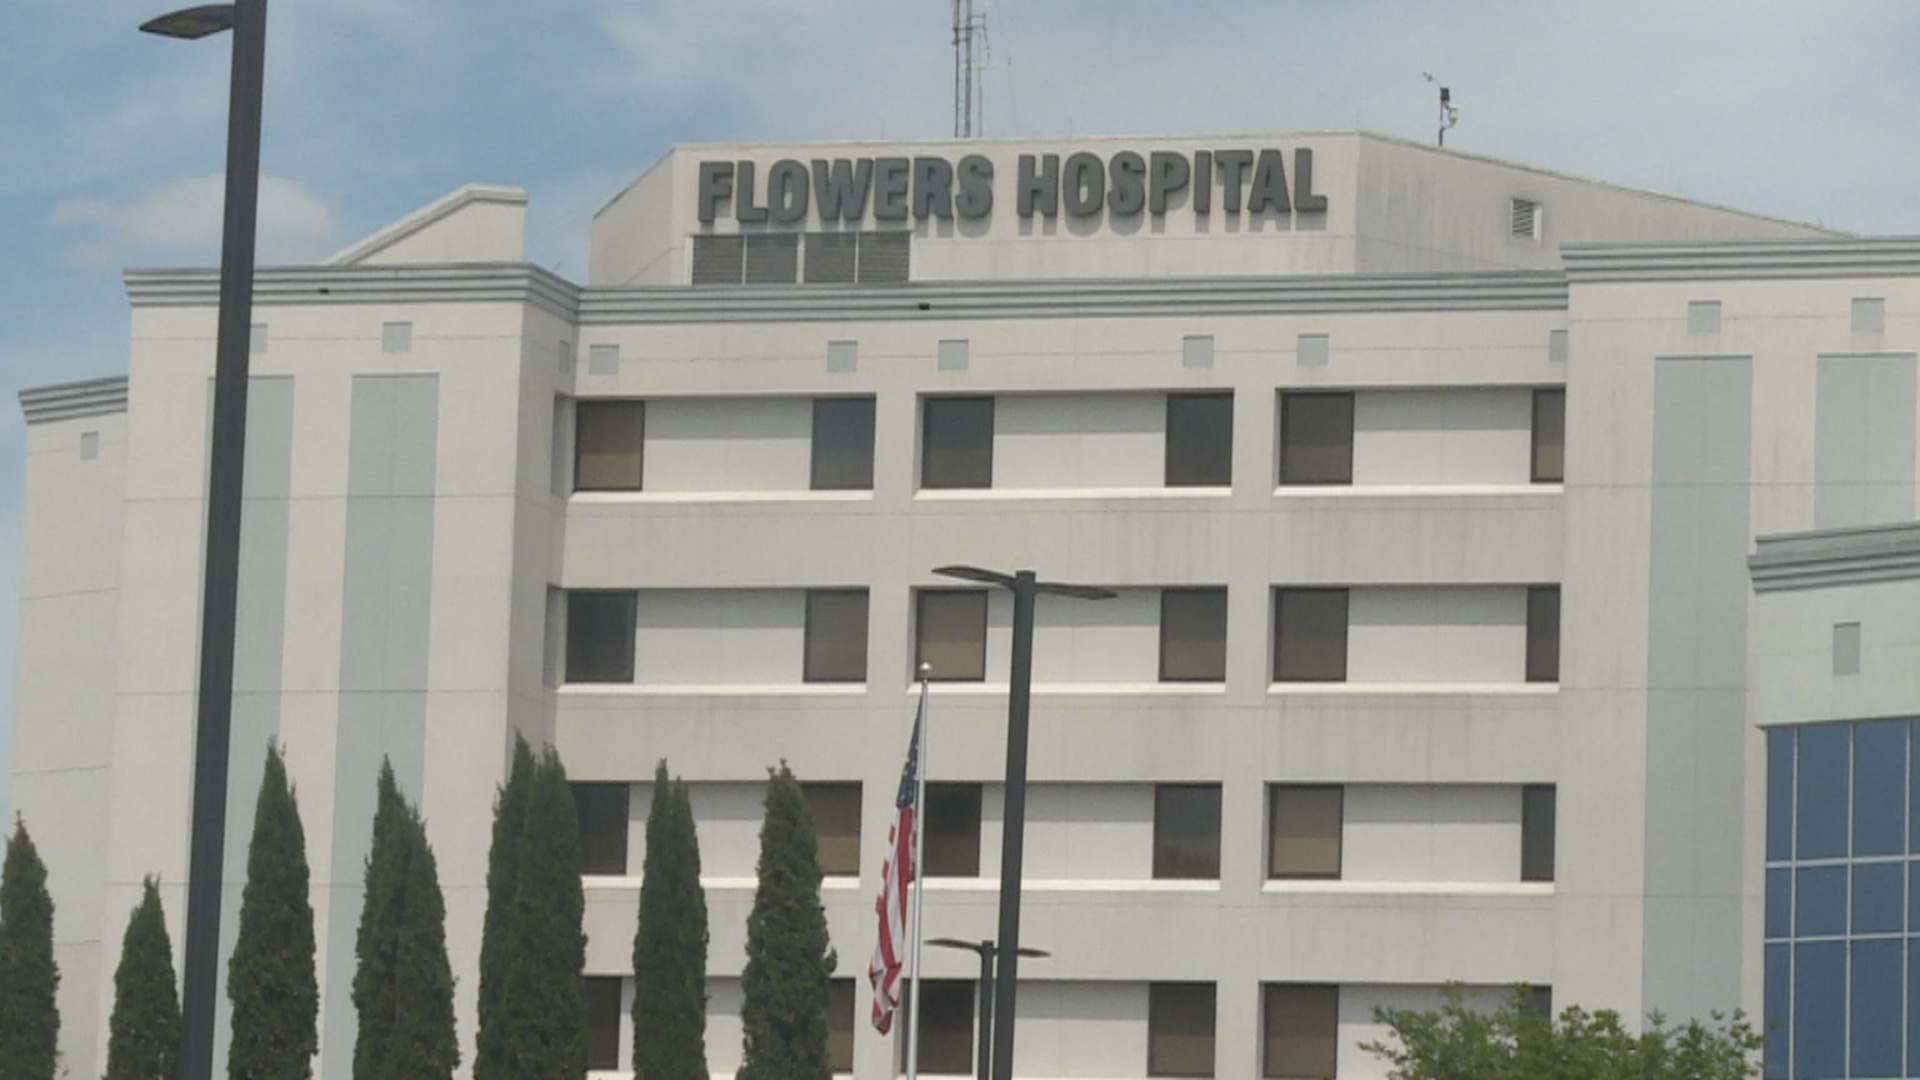 Flowers Hospital Revising Visitation Policy